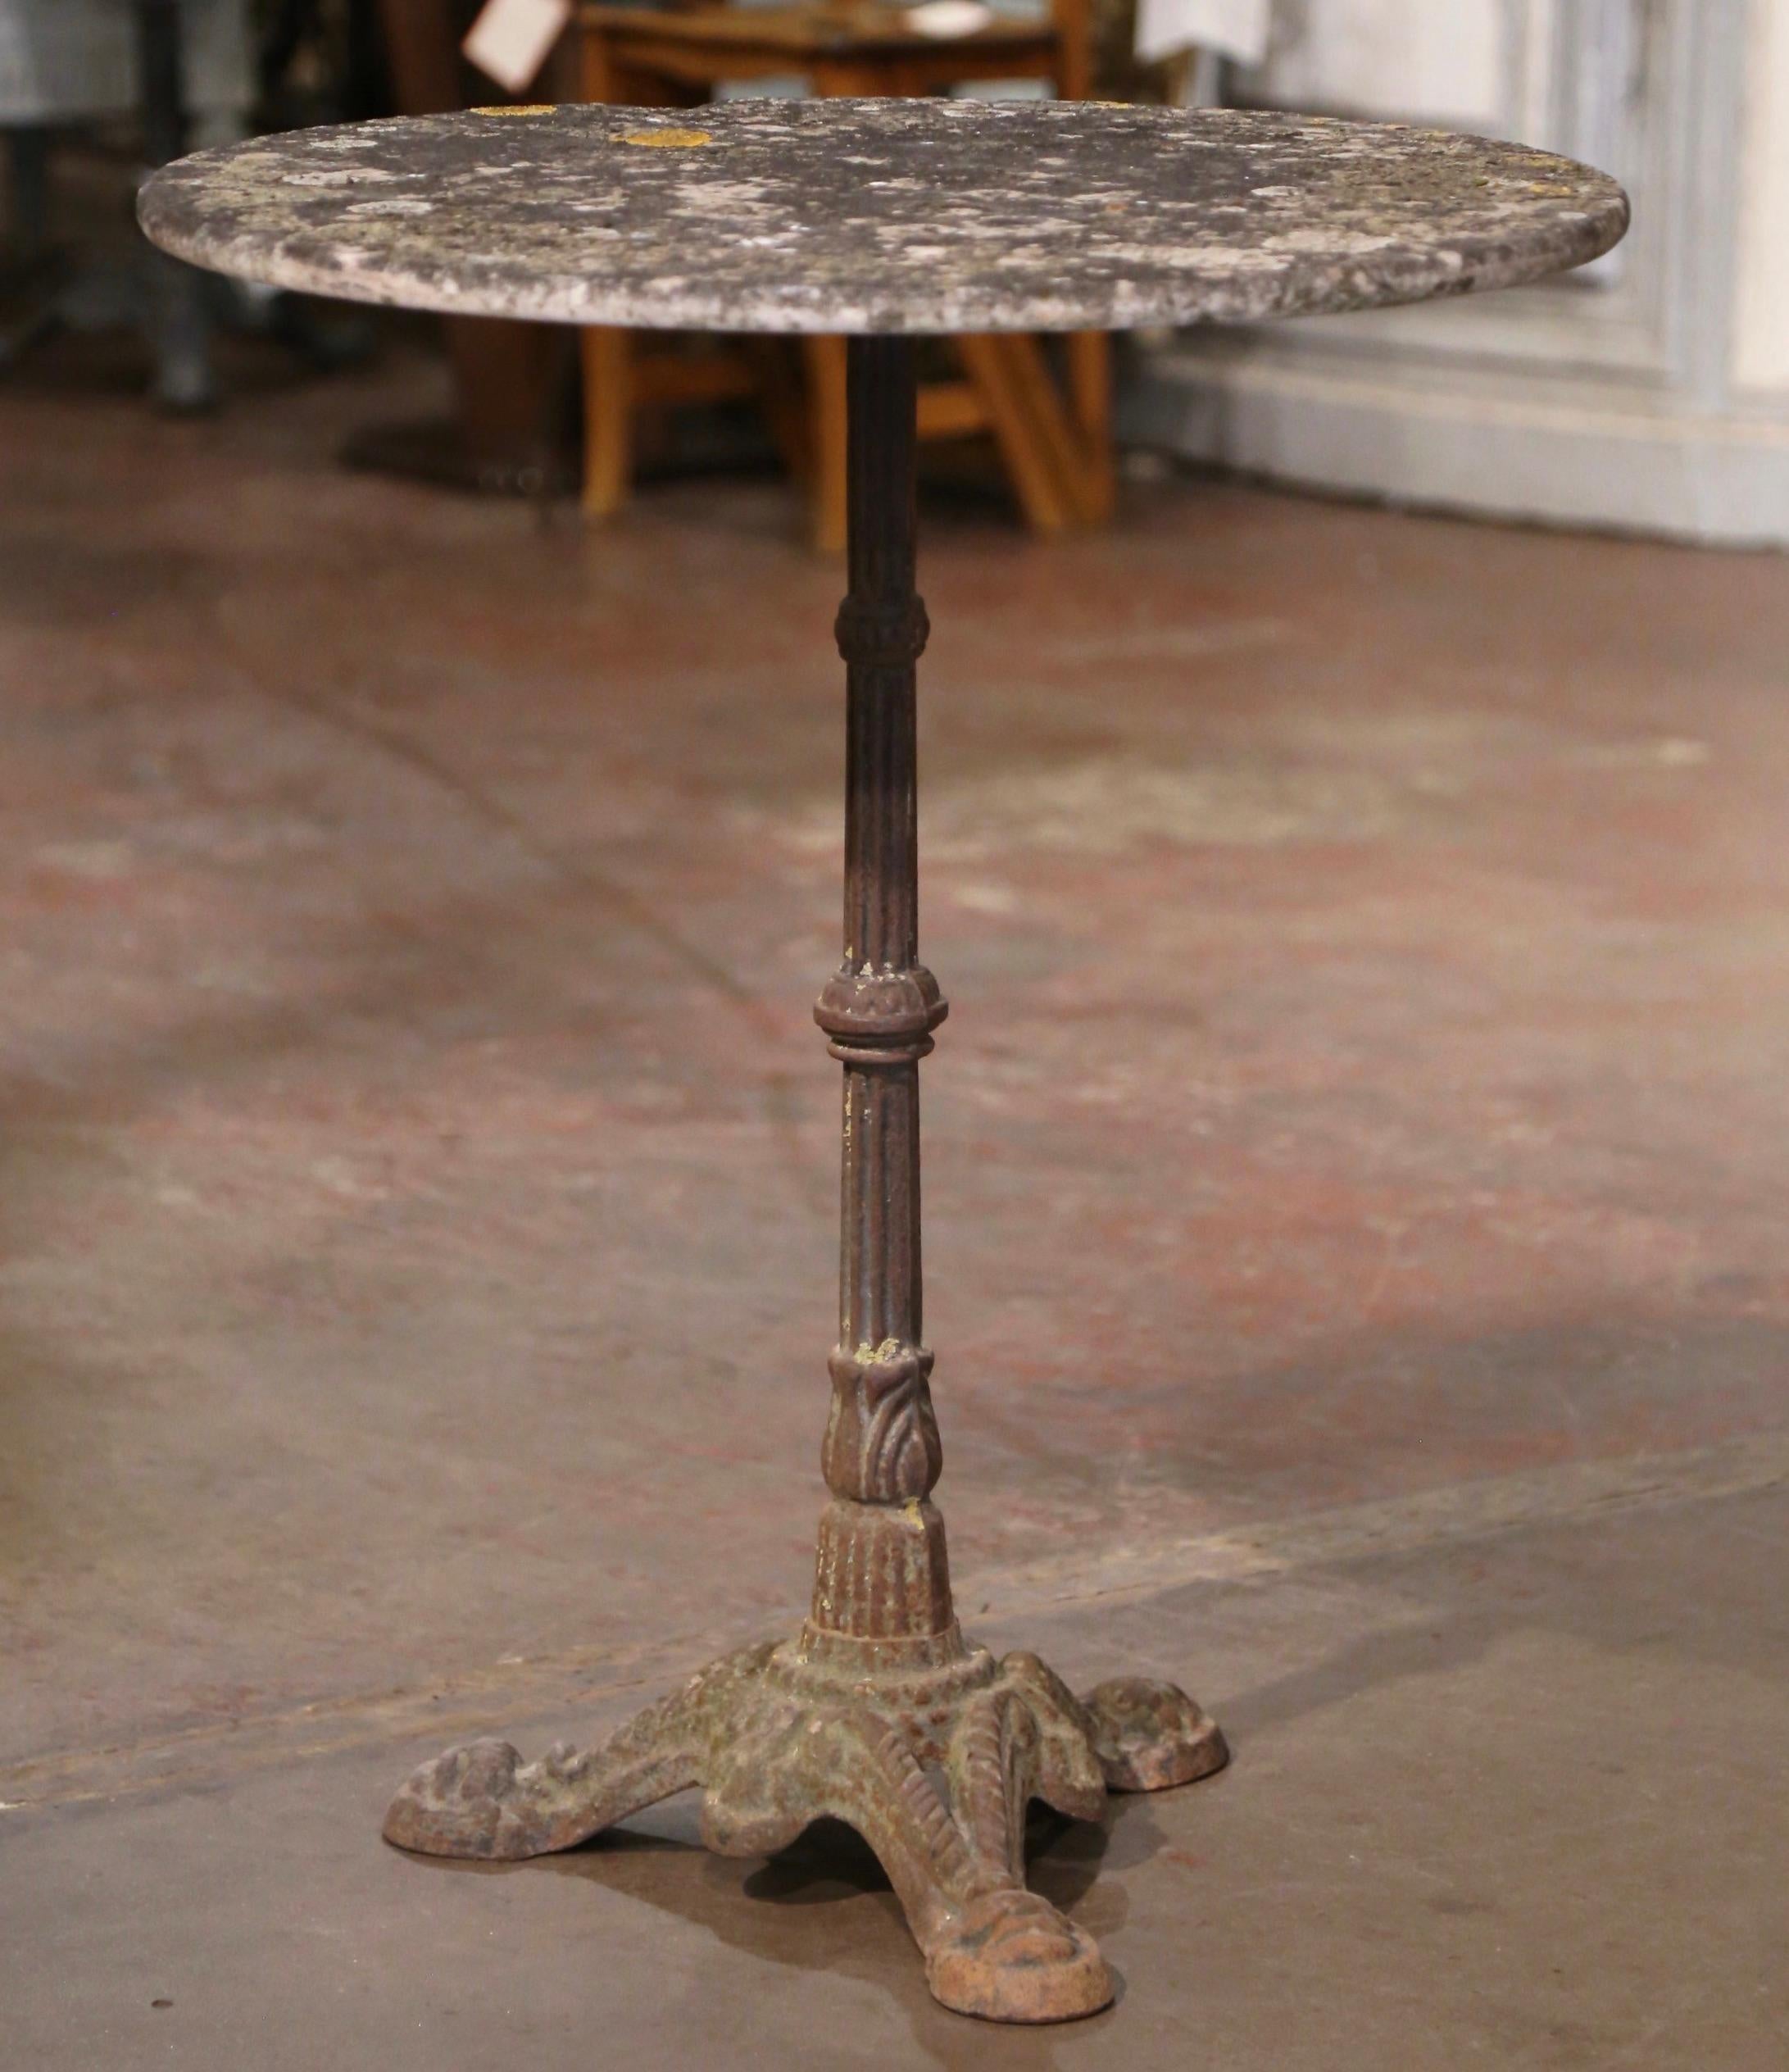 This exquisite, antique Napoleon III gueridon is as authentic and original as it can be! Crafted in Normandy, France, circa 1870, the classic bistrot table features a round stone top with all natural finish over a long iron stem ending with three